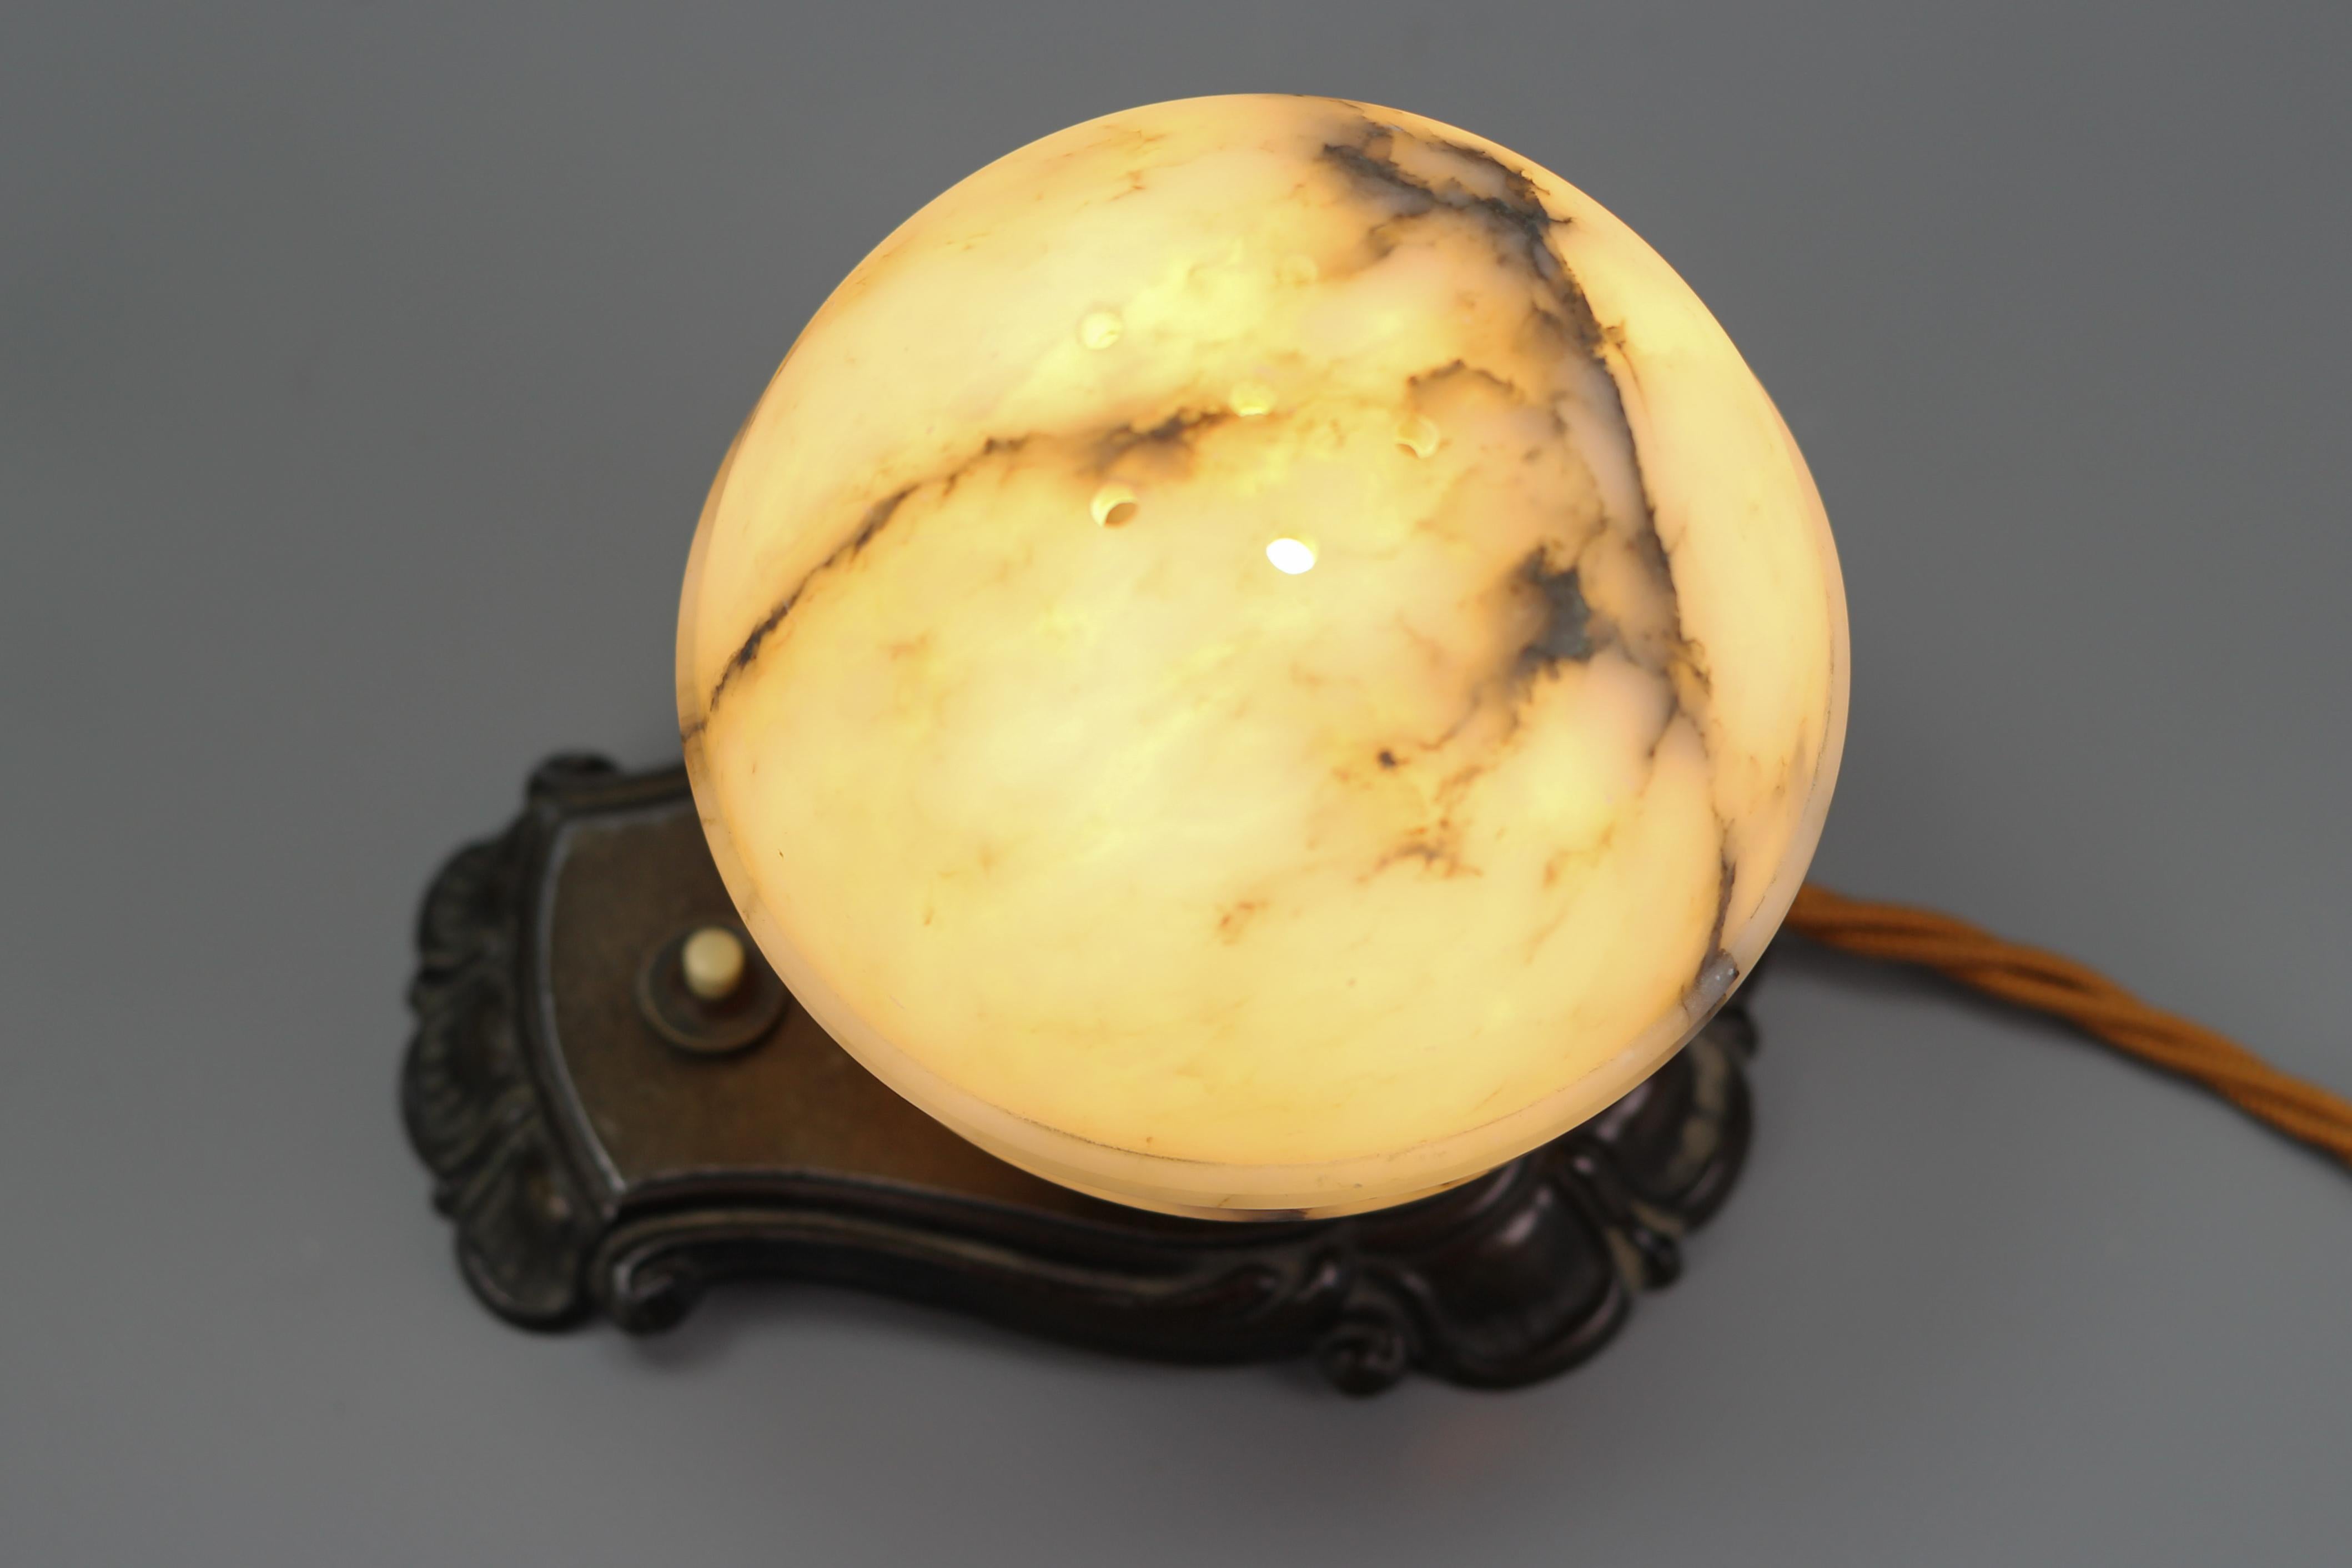 Art Deco White and Black Alabaster Globe Sphere Night Lamp or Mood Lamp, 1930s For Sale 2